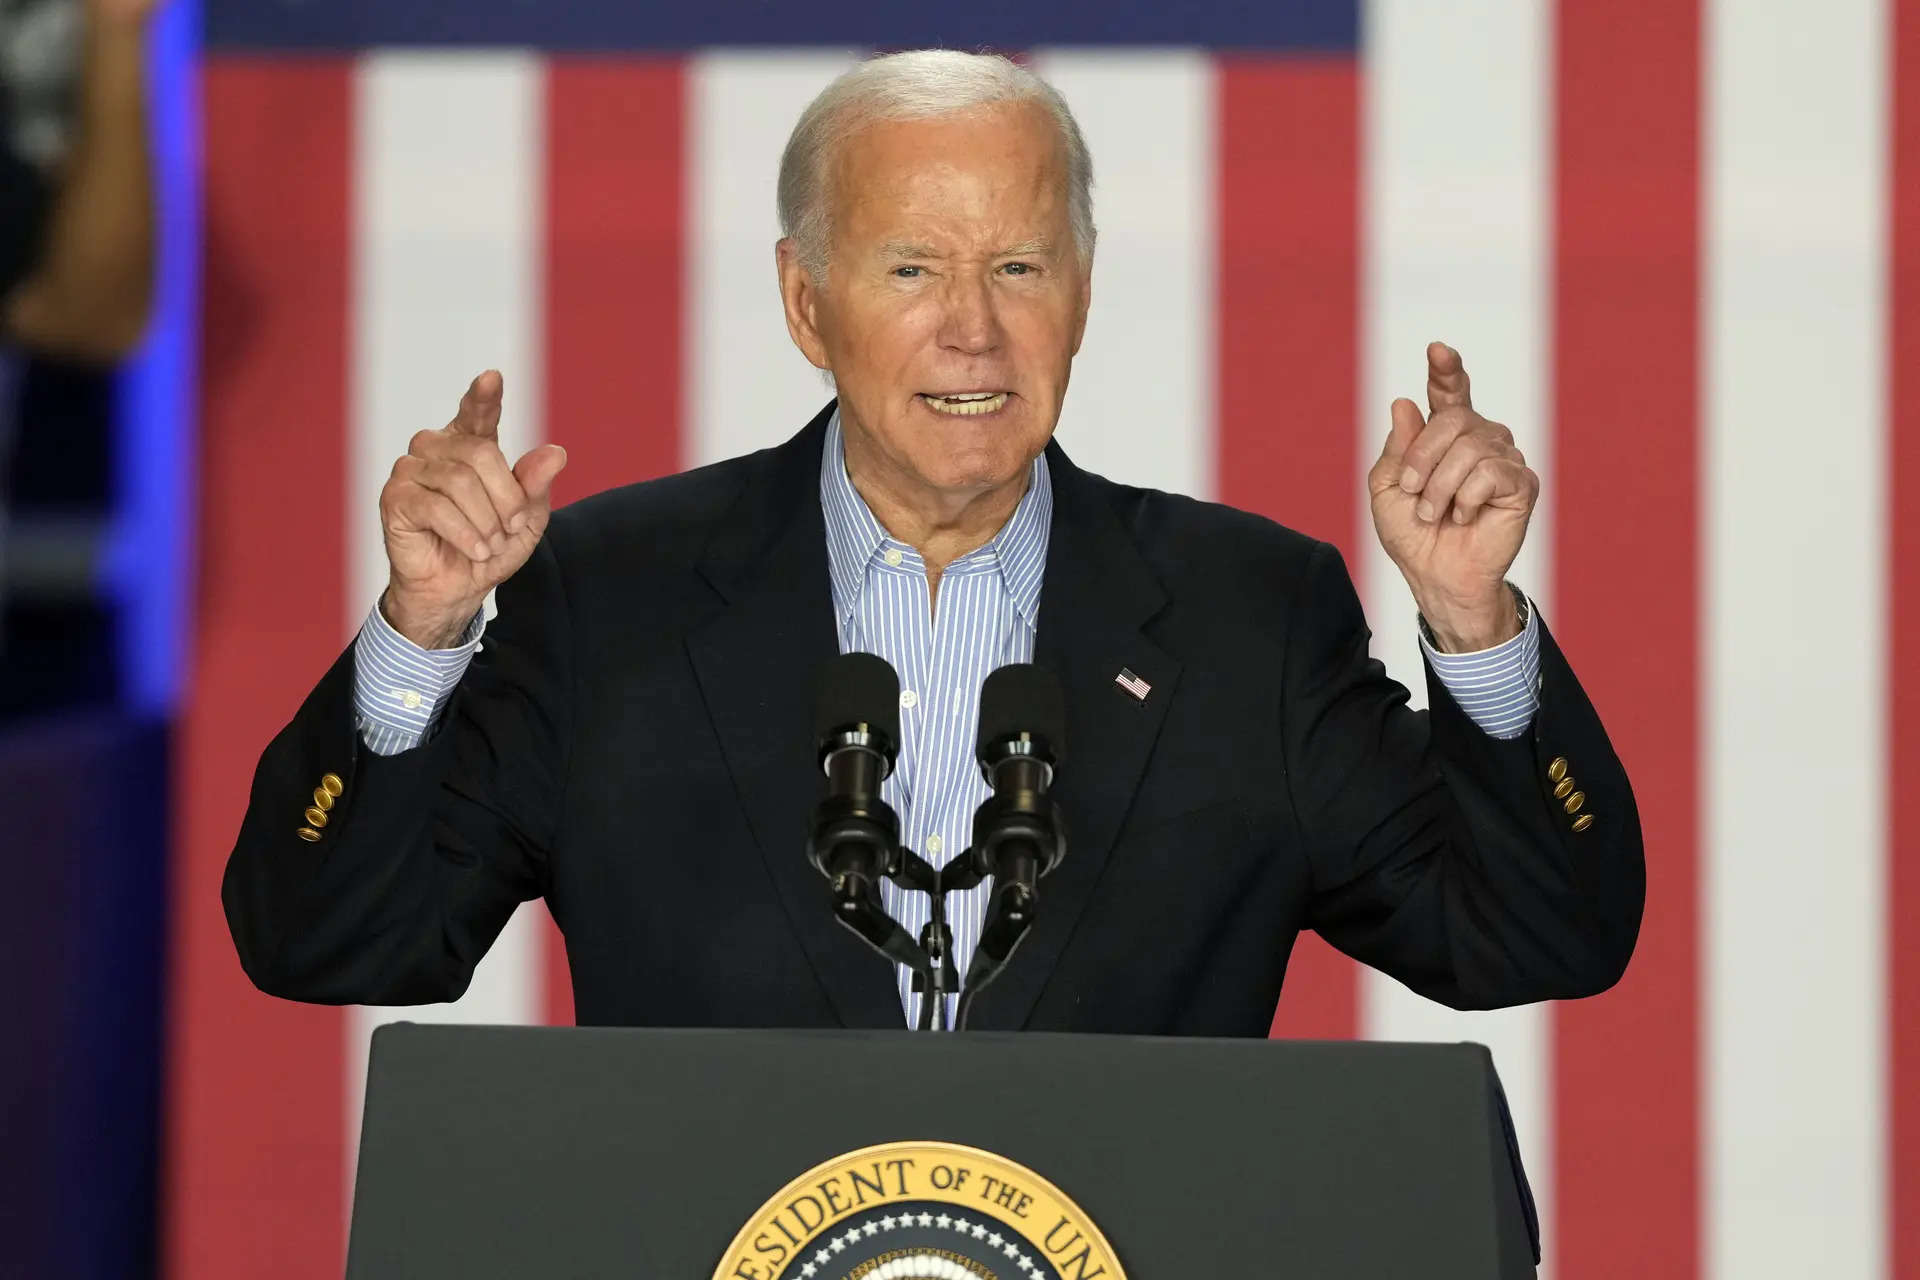 To a defiant Joe Biden, the 2024 race is up to the voters, not to Democrats on Capitol Hill 